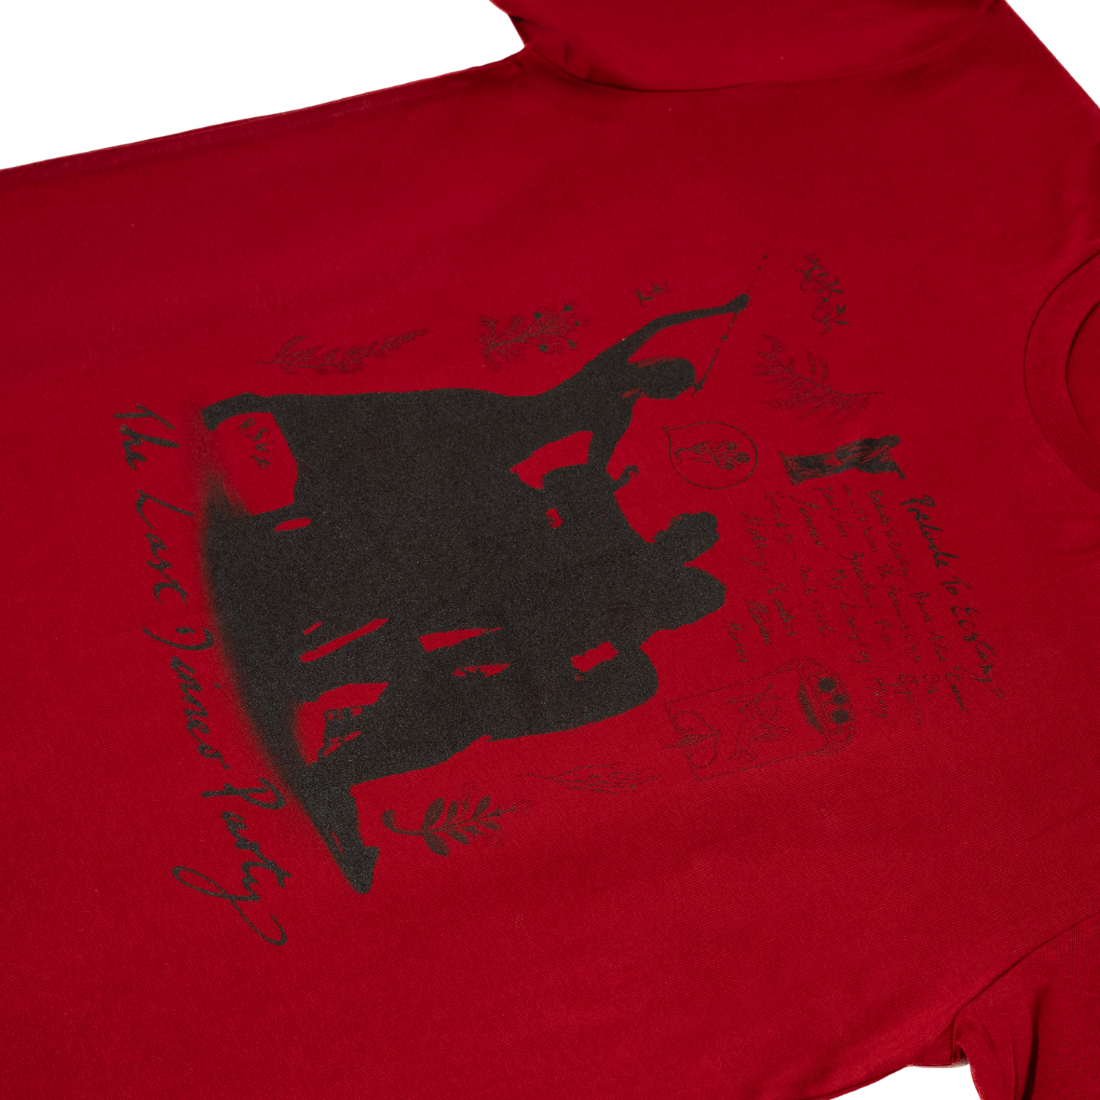 The Last Dinner Party - Giallo Red Tee